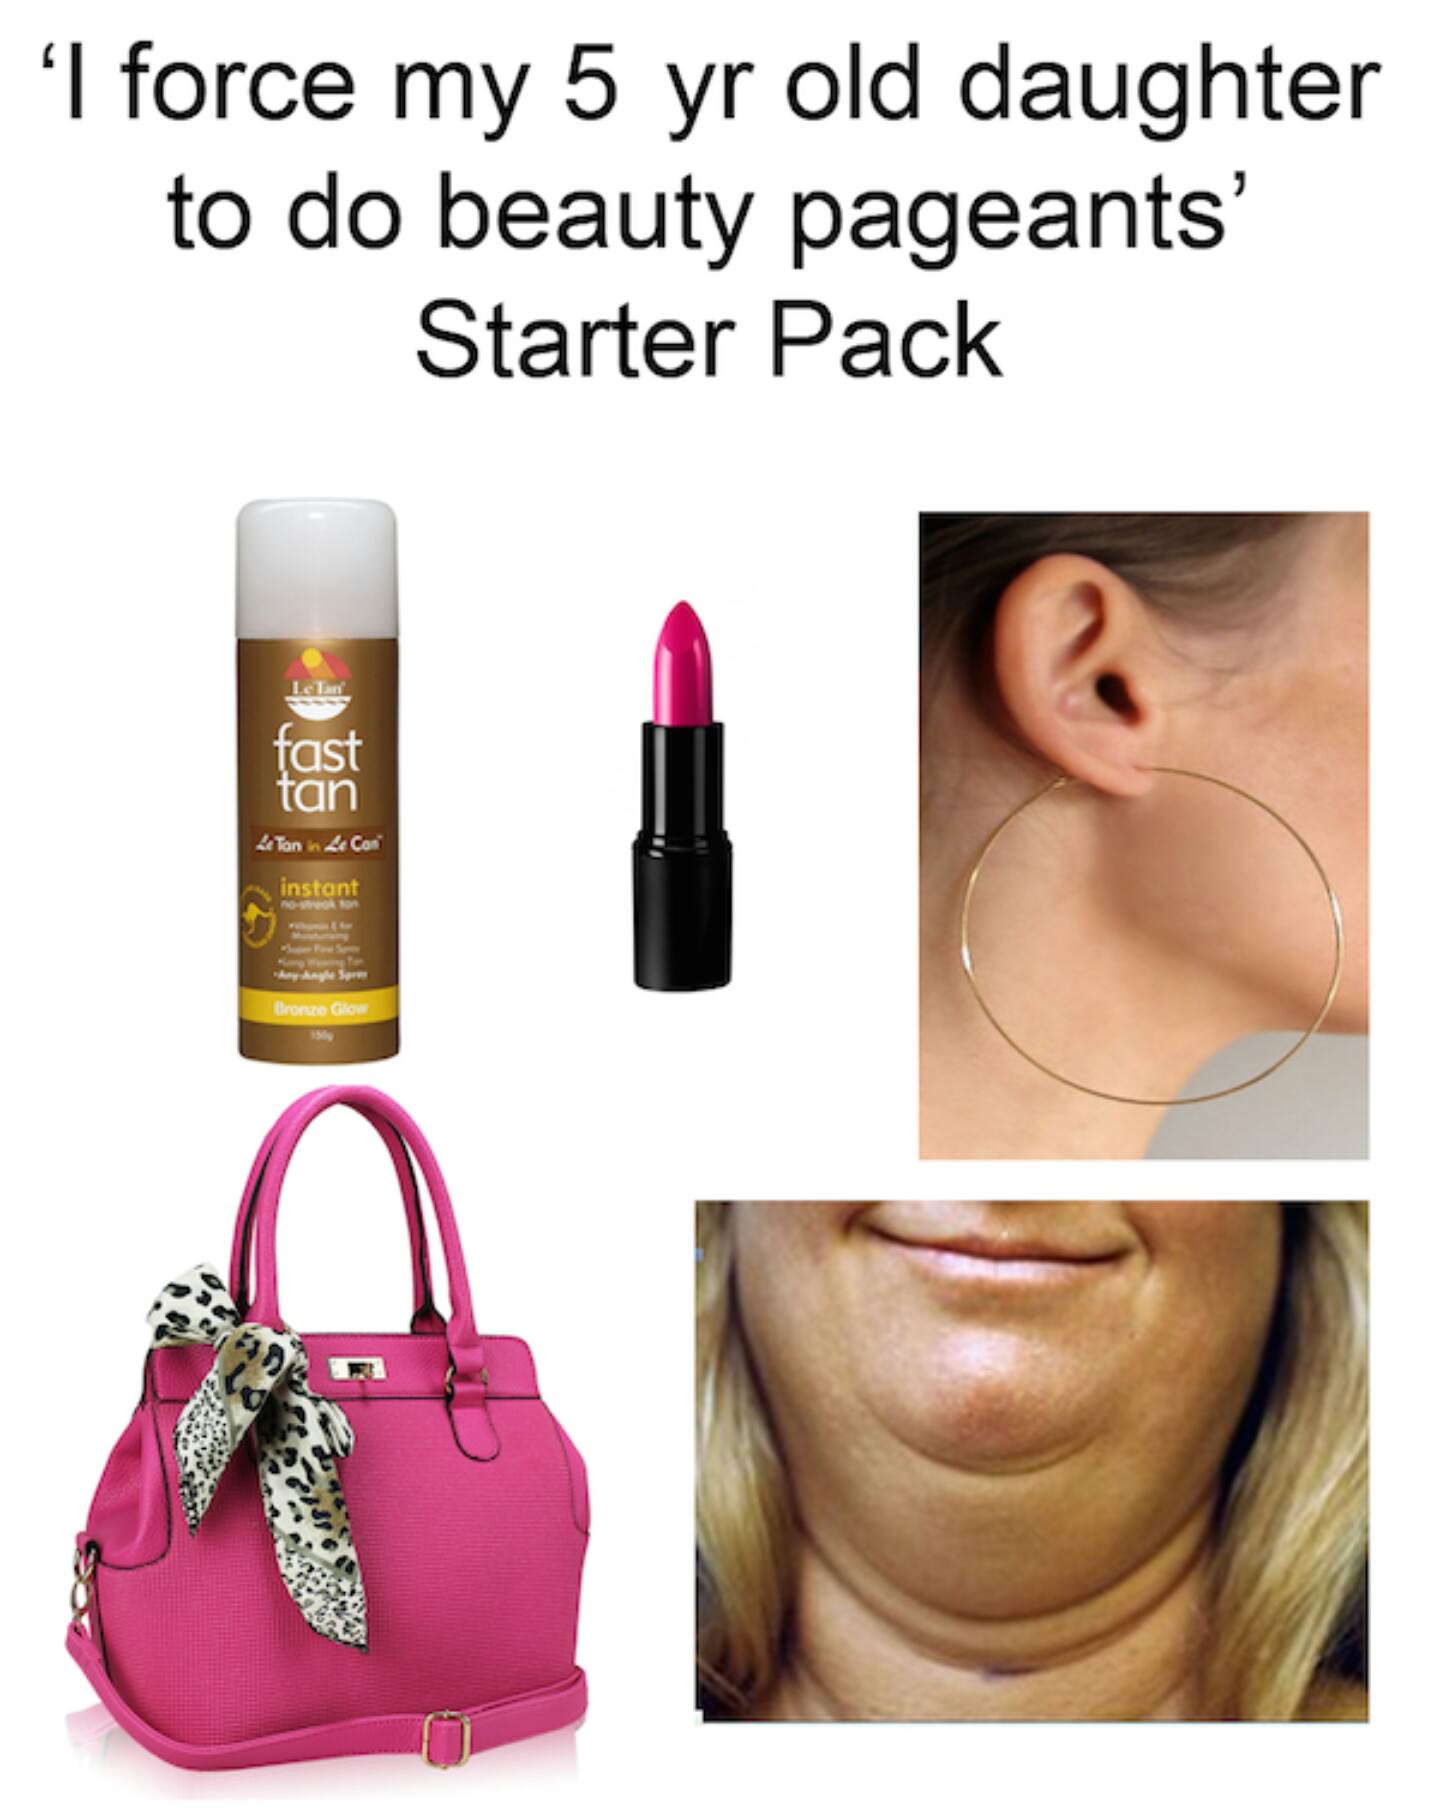 starter pack - 5 yr old starter pack - I force my 5 yr old daughter to do beauty pageants' Starter Pack tast tan Ton in 2 Con instant Bronze Glow